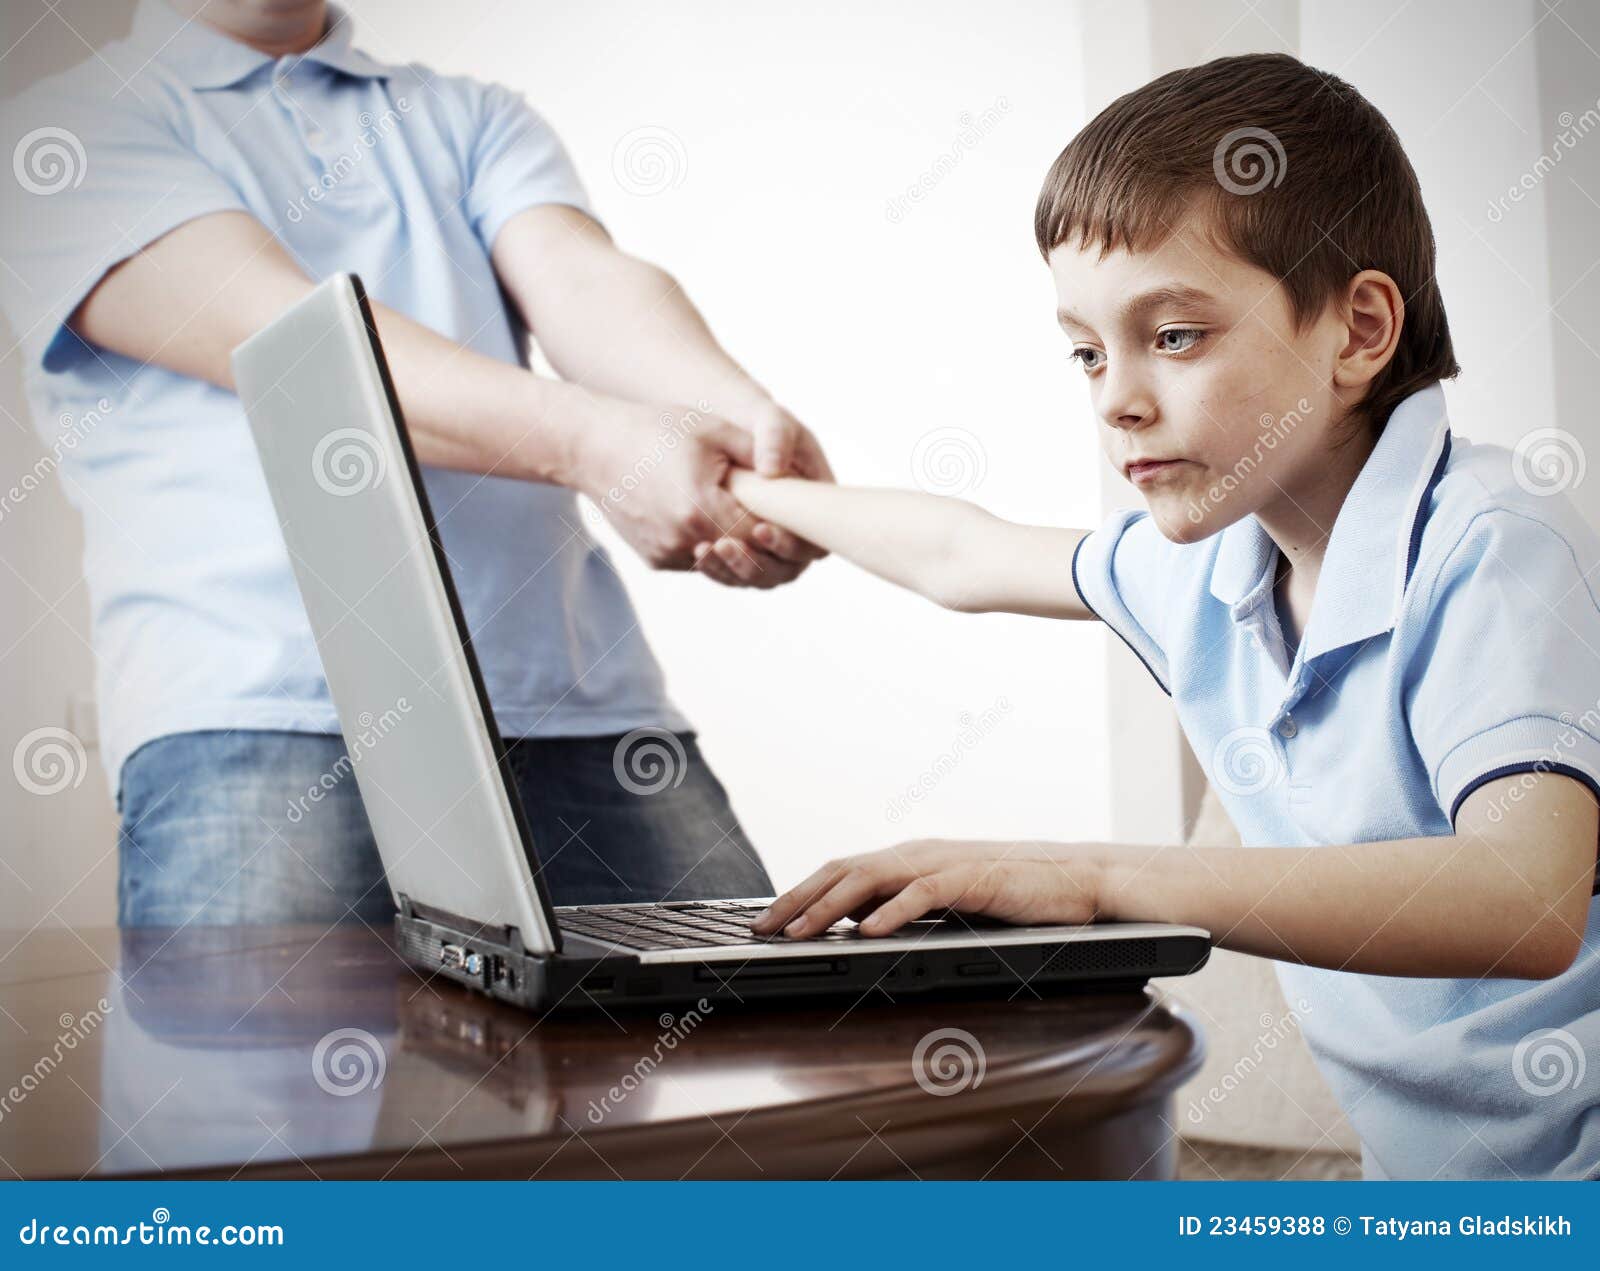 Father Dragging Son From The Computer Stock Photo - Image ...